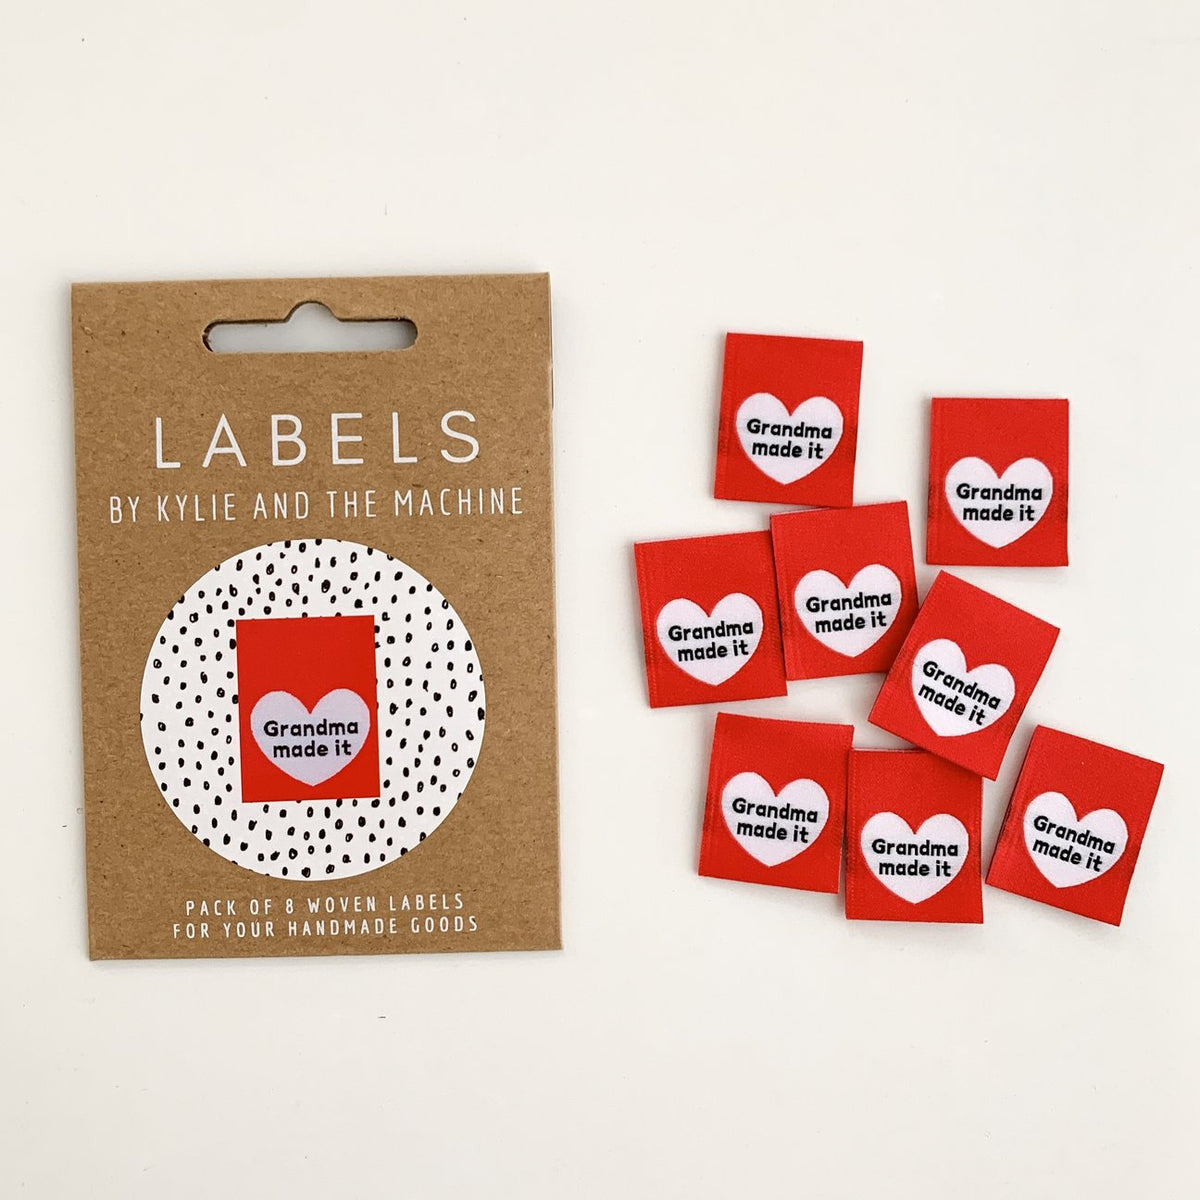 GRANDMA MADE IT - Pack of 8 Woven Labels